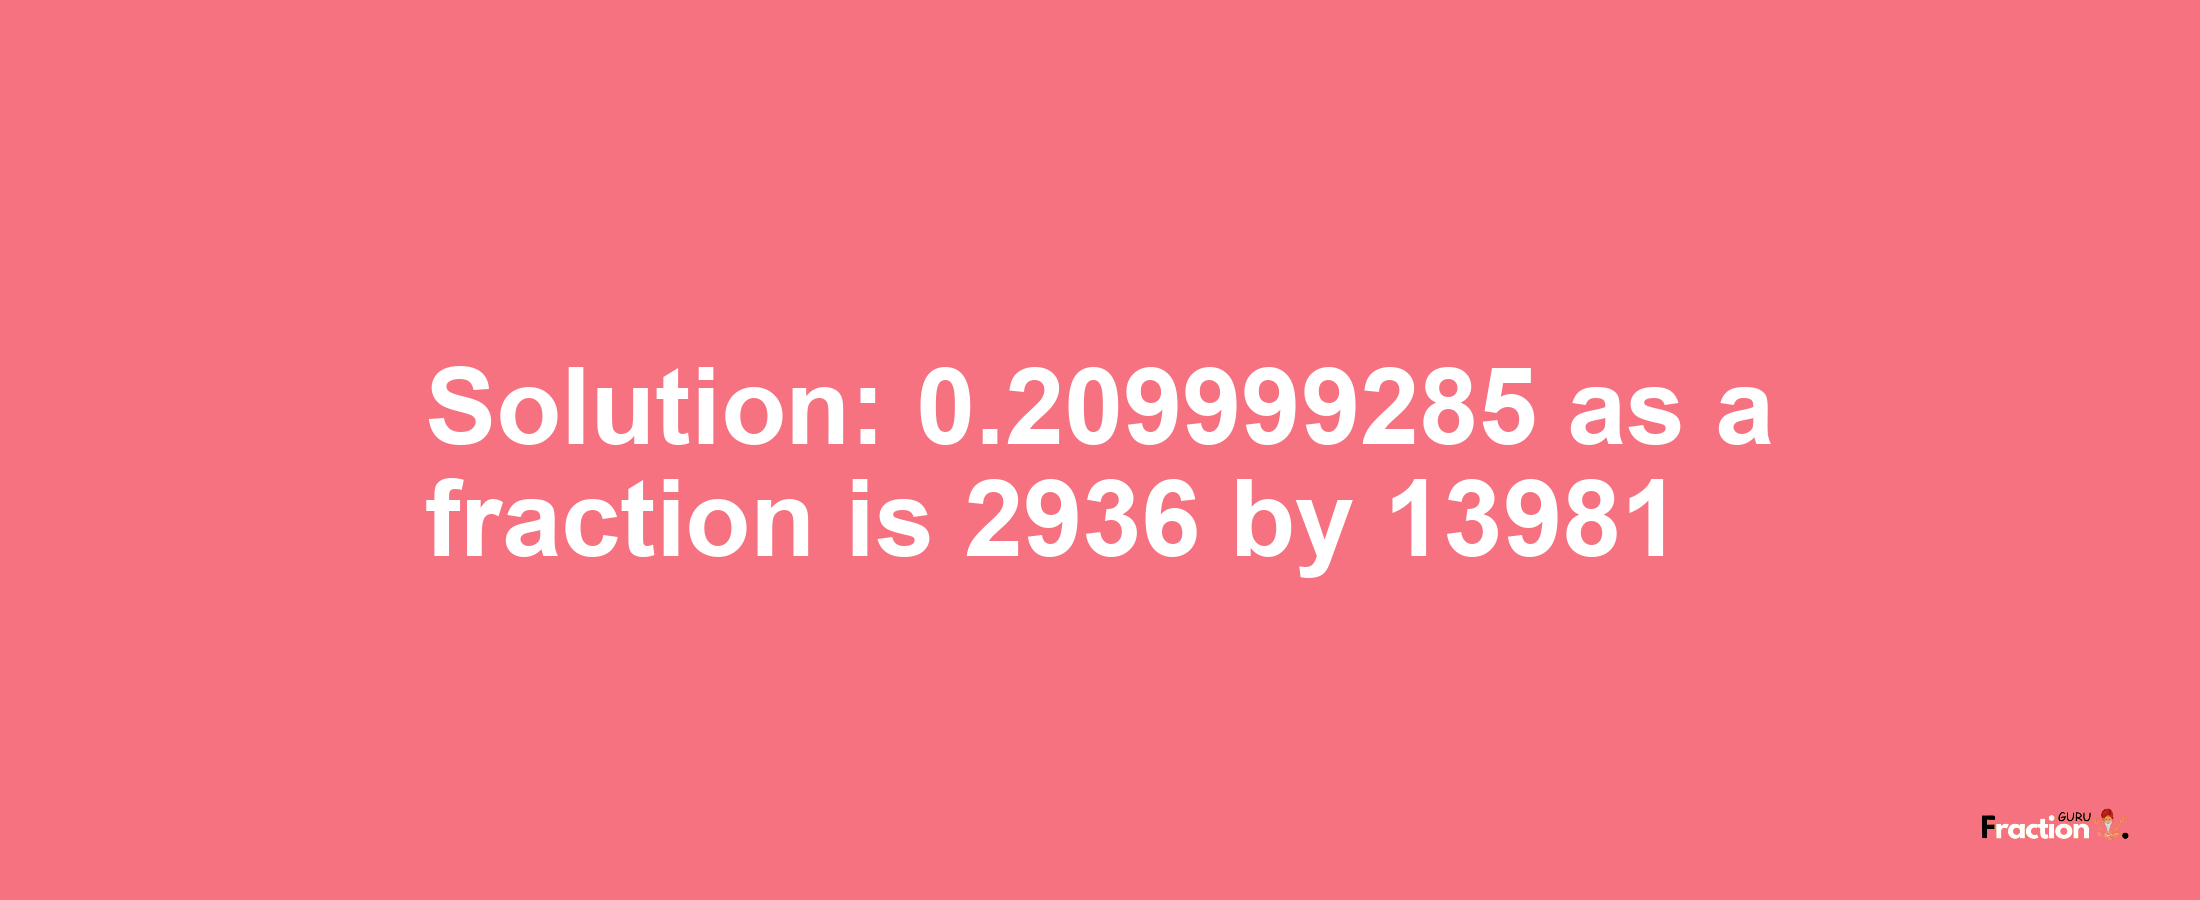 Solution:0.209999285 as a fraction is 2936/13981